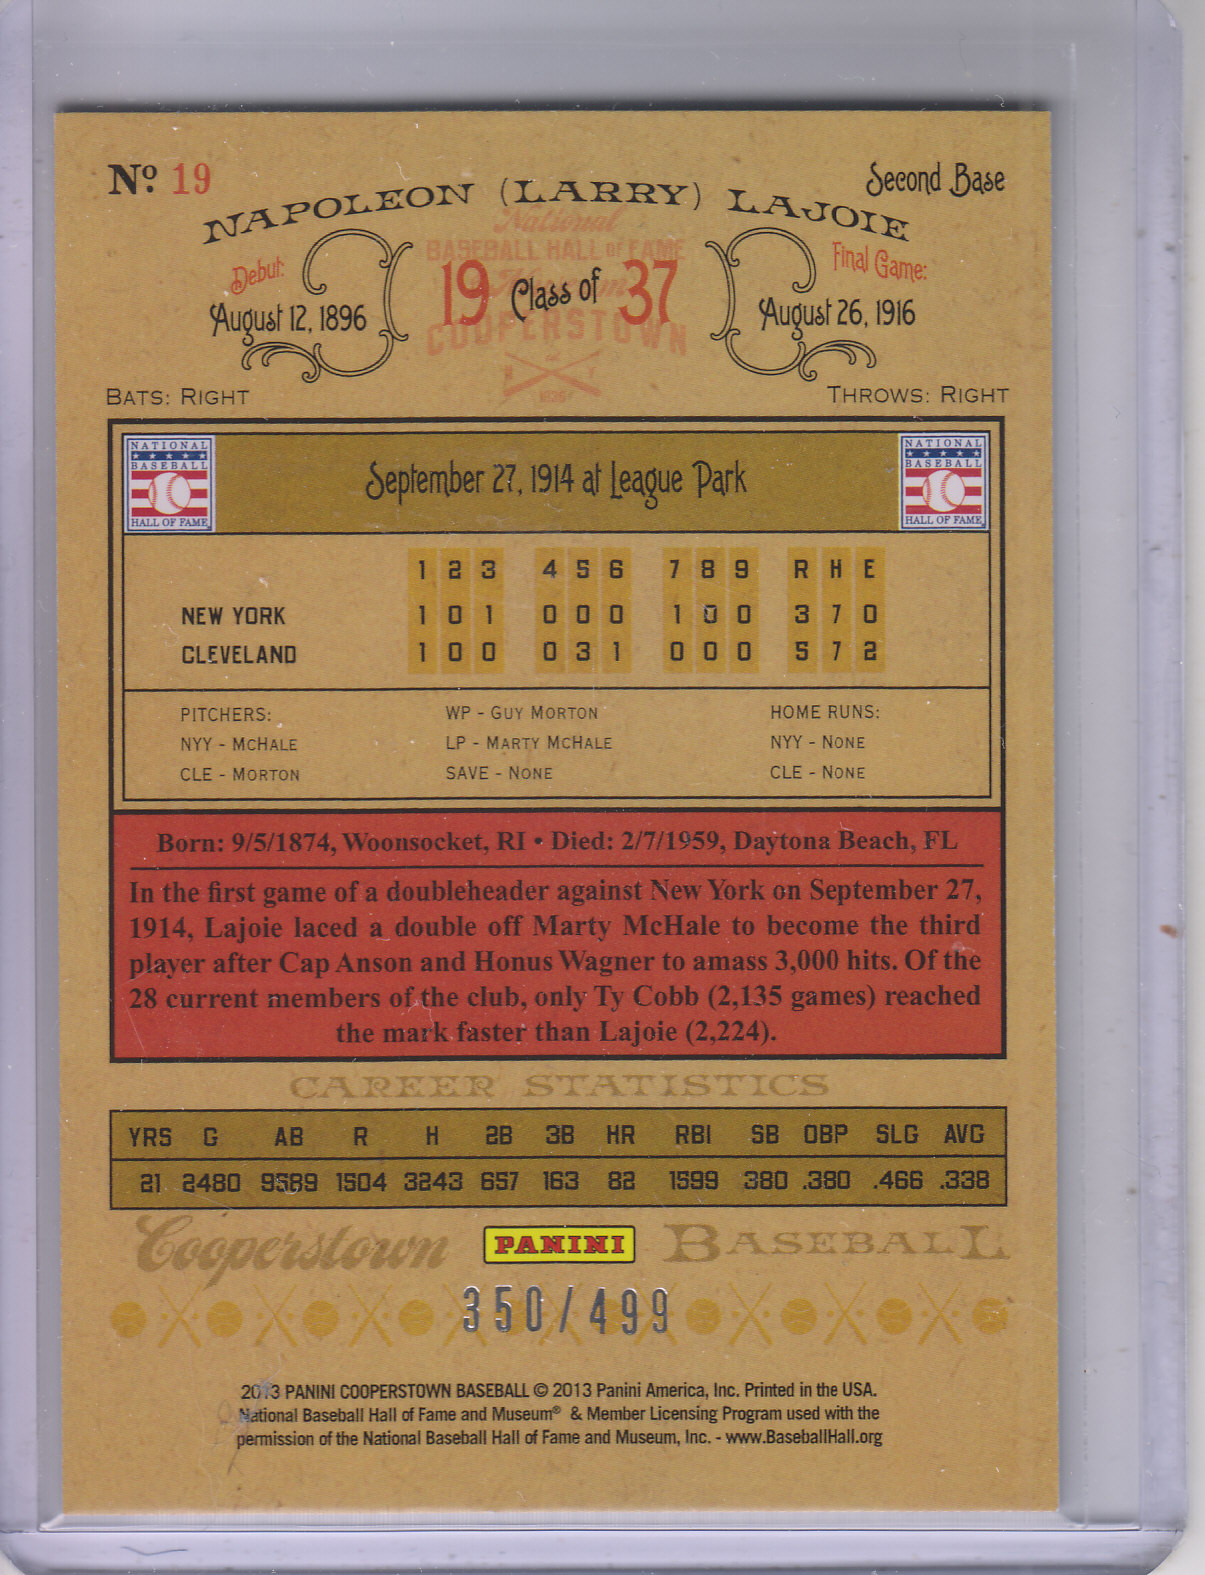 2013 Panini Cooperstown Blue Crystal #19 Nap Lajoie back image